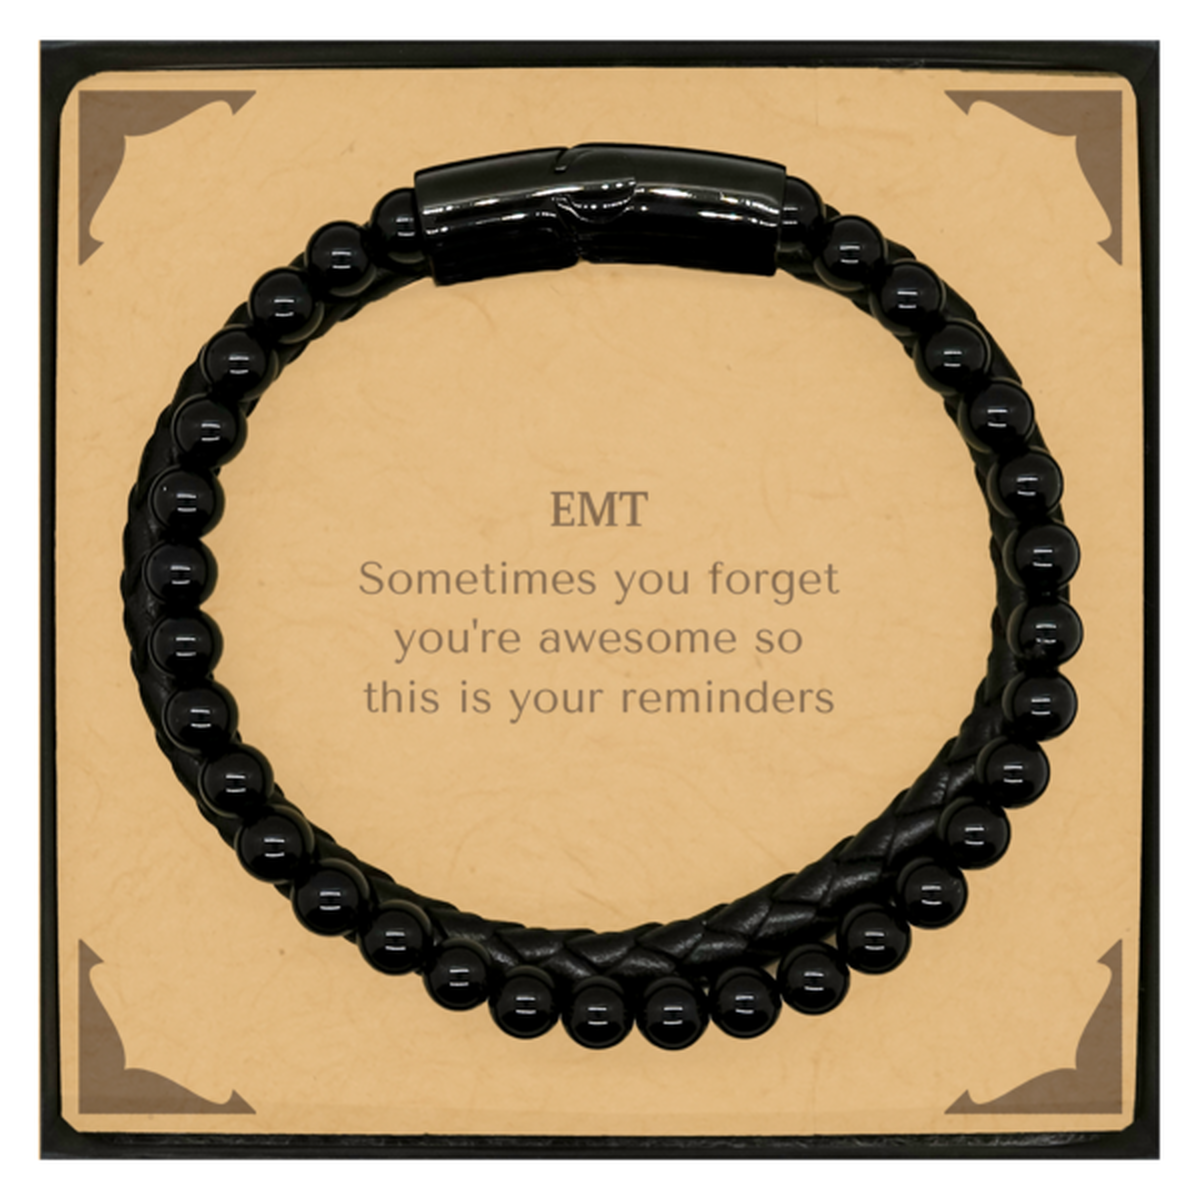 Sentimental EMT Stone Leather Bracelets, EMT Sometimes you forget you're awesome so this is your reminders, Graduation Christmas Birthday Gifts for EMT, Men, Women, Coworkers